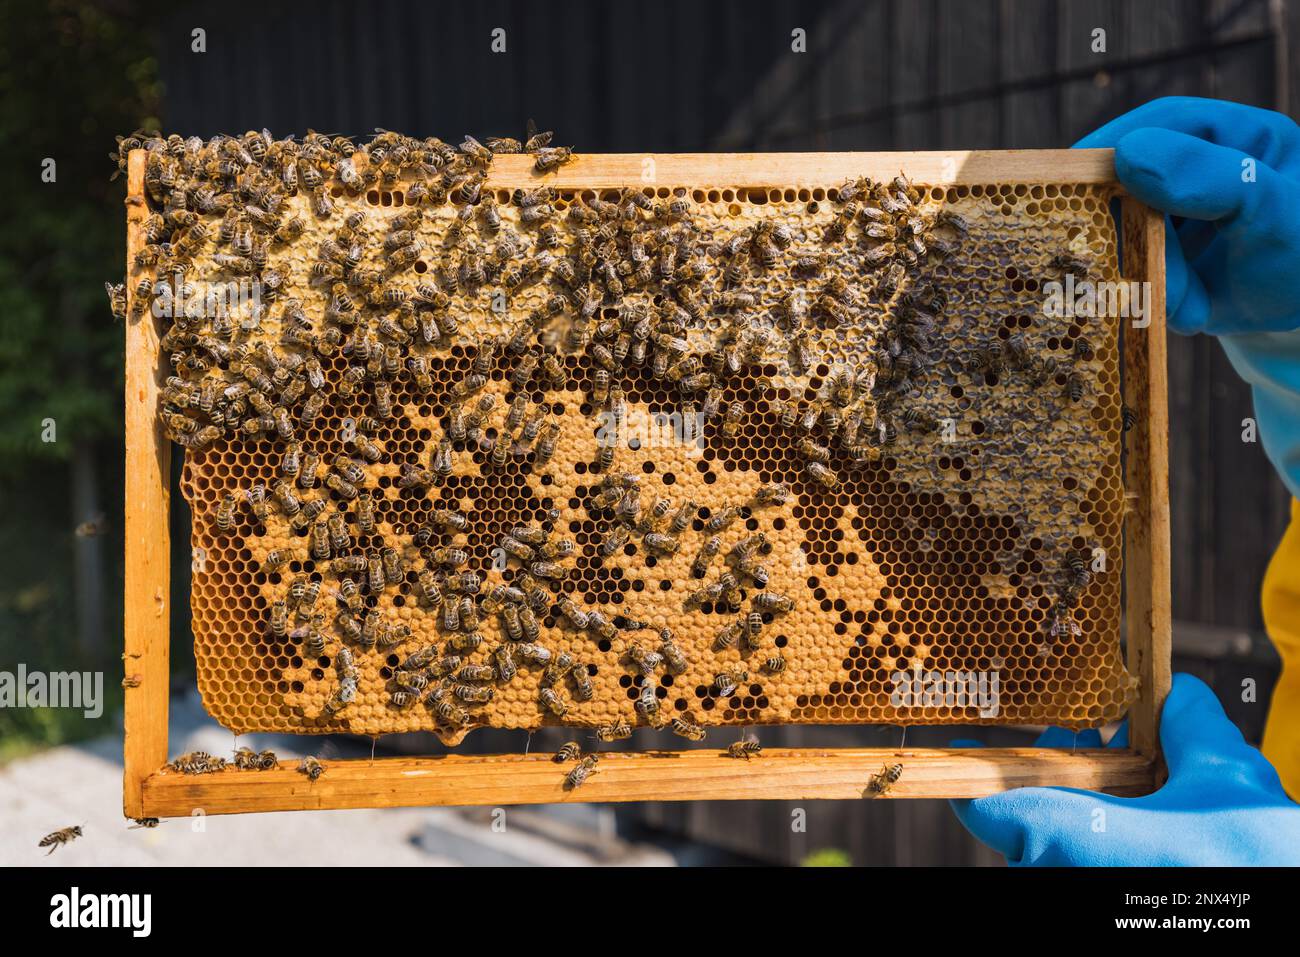 https://c8.alamy.com/comp/2NX4YJP/hive-frame-covered-with-bees-and-honeycomb-part-of-the-modern-movable-comb-hive-macro-shot-concept-of-nature-and-beekeeping-2NX4YJP.jpg